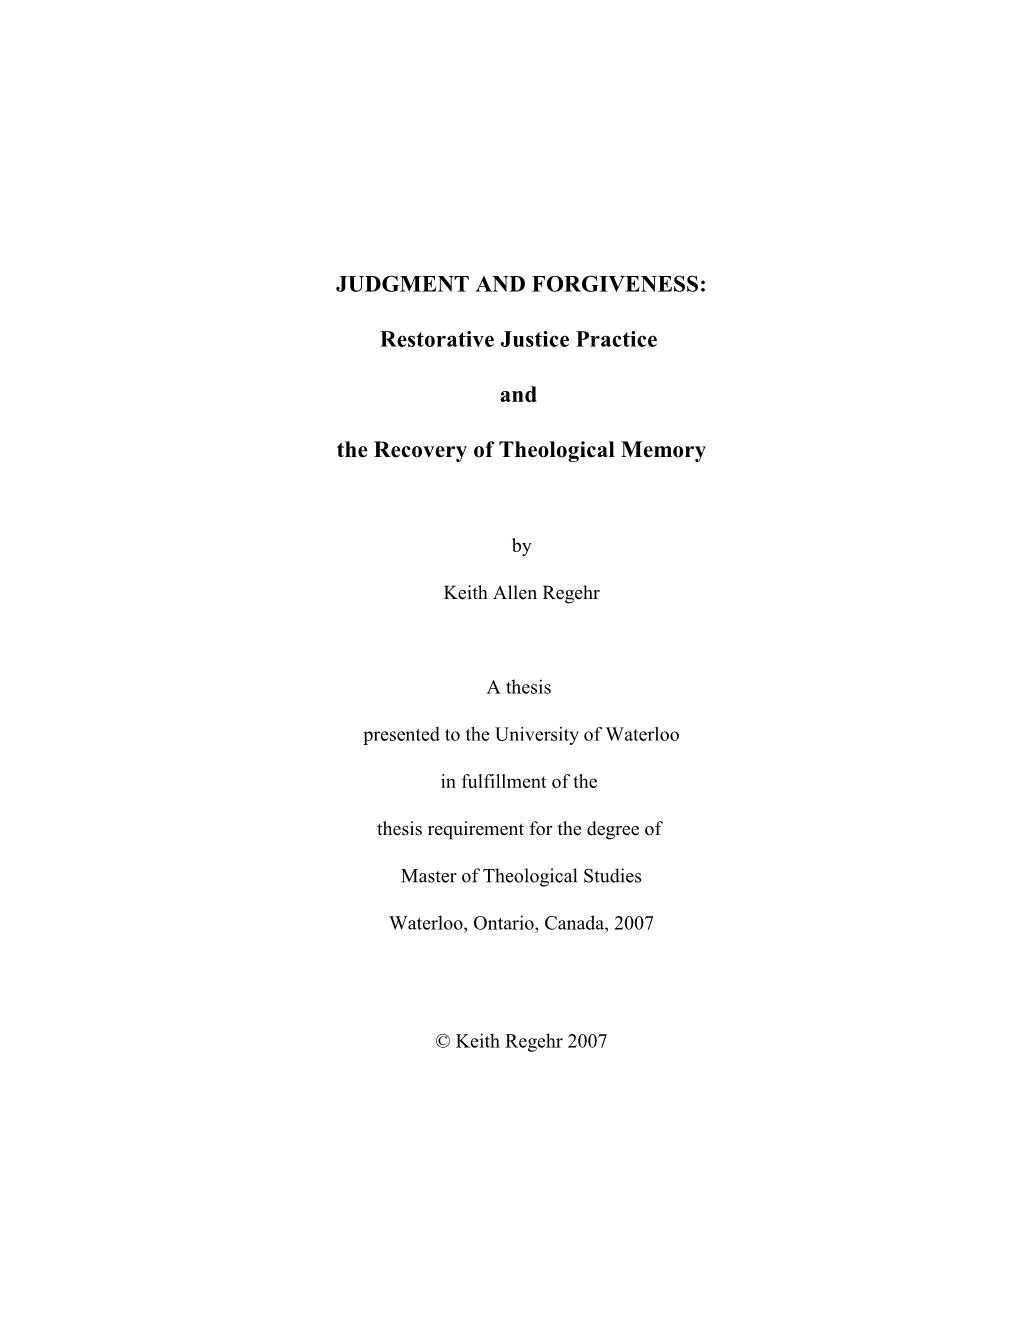 JUDGMENT and FORGIVENESS: Restorative Justice Practice and the Recovery of Theological Memory